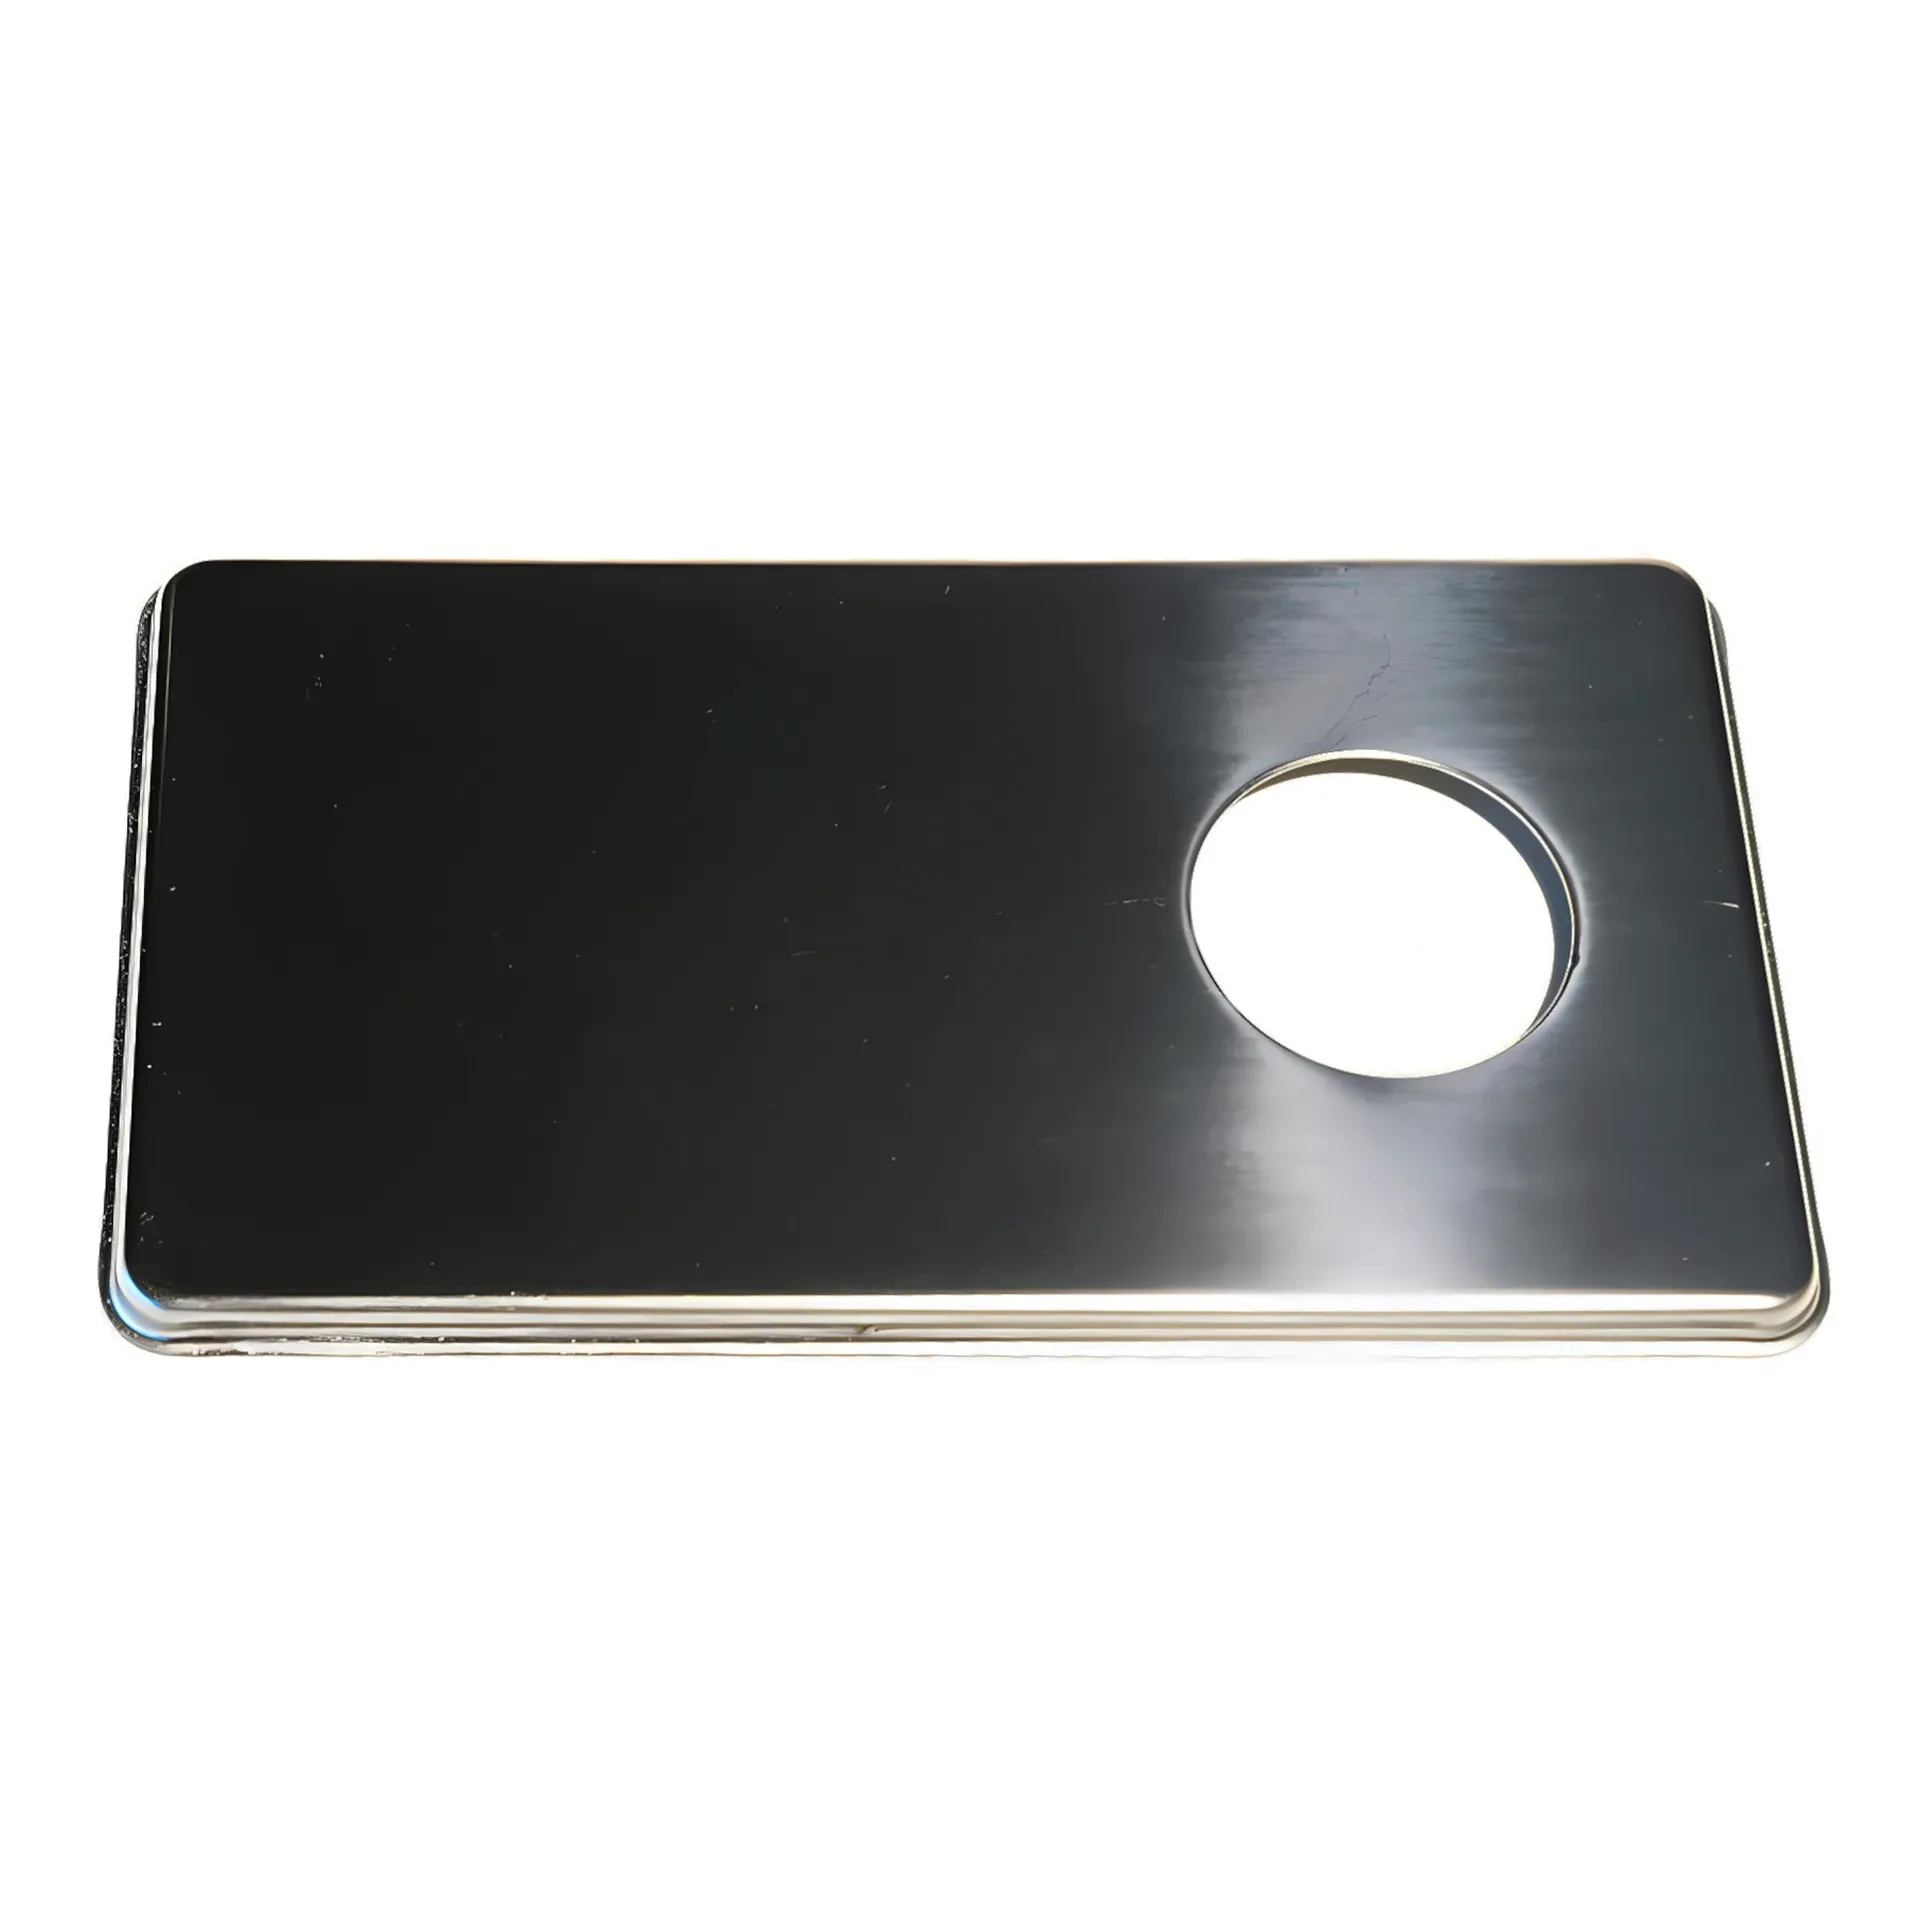 main production of stainless steel plates